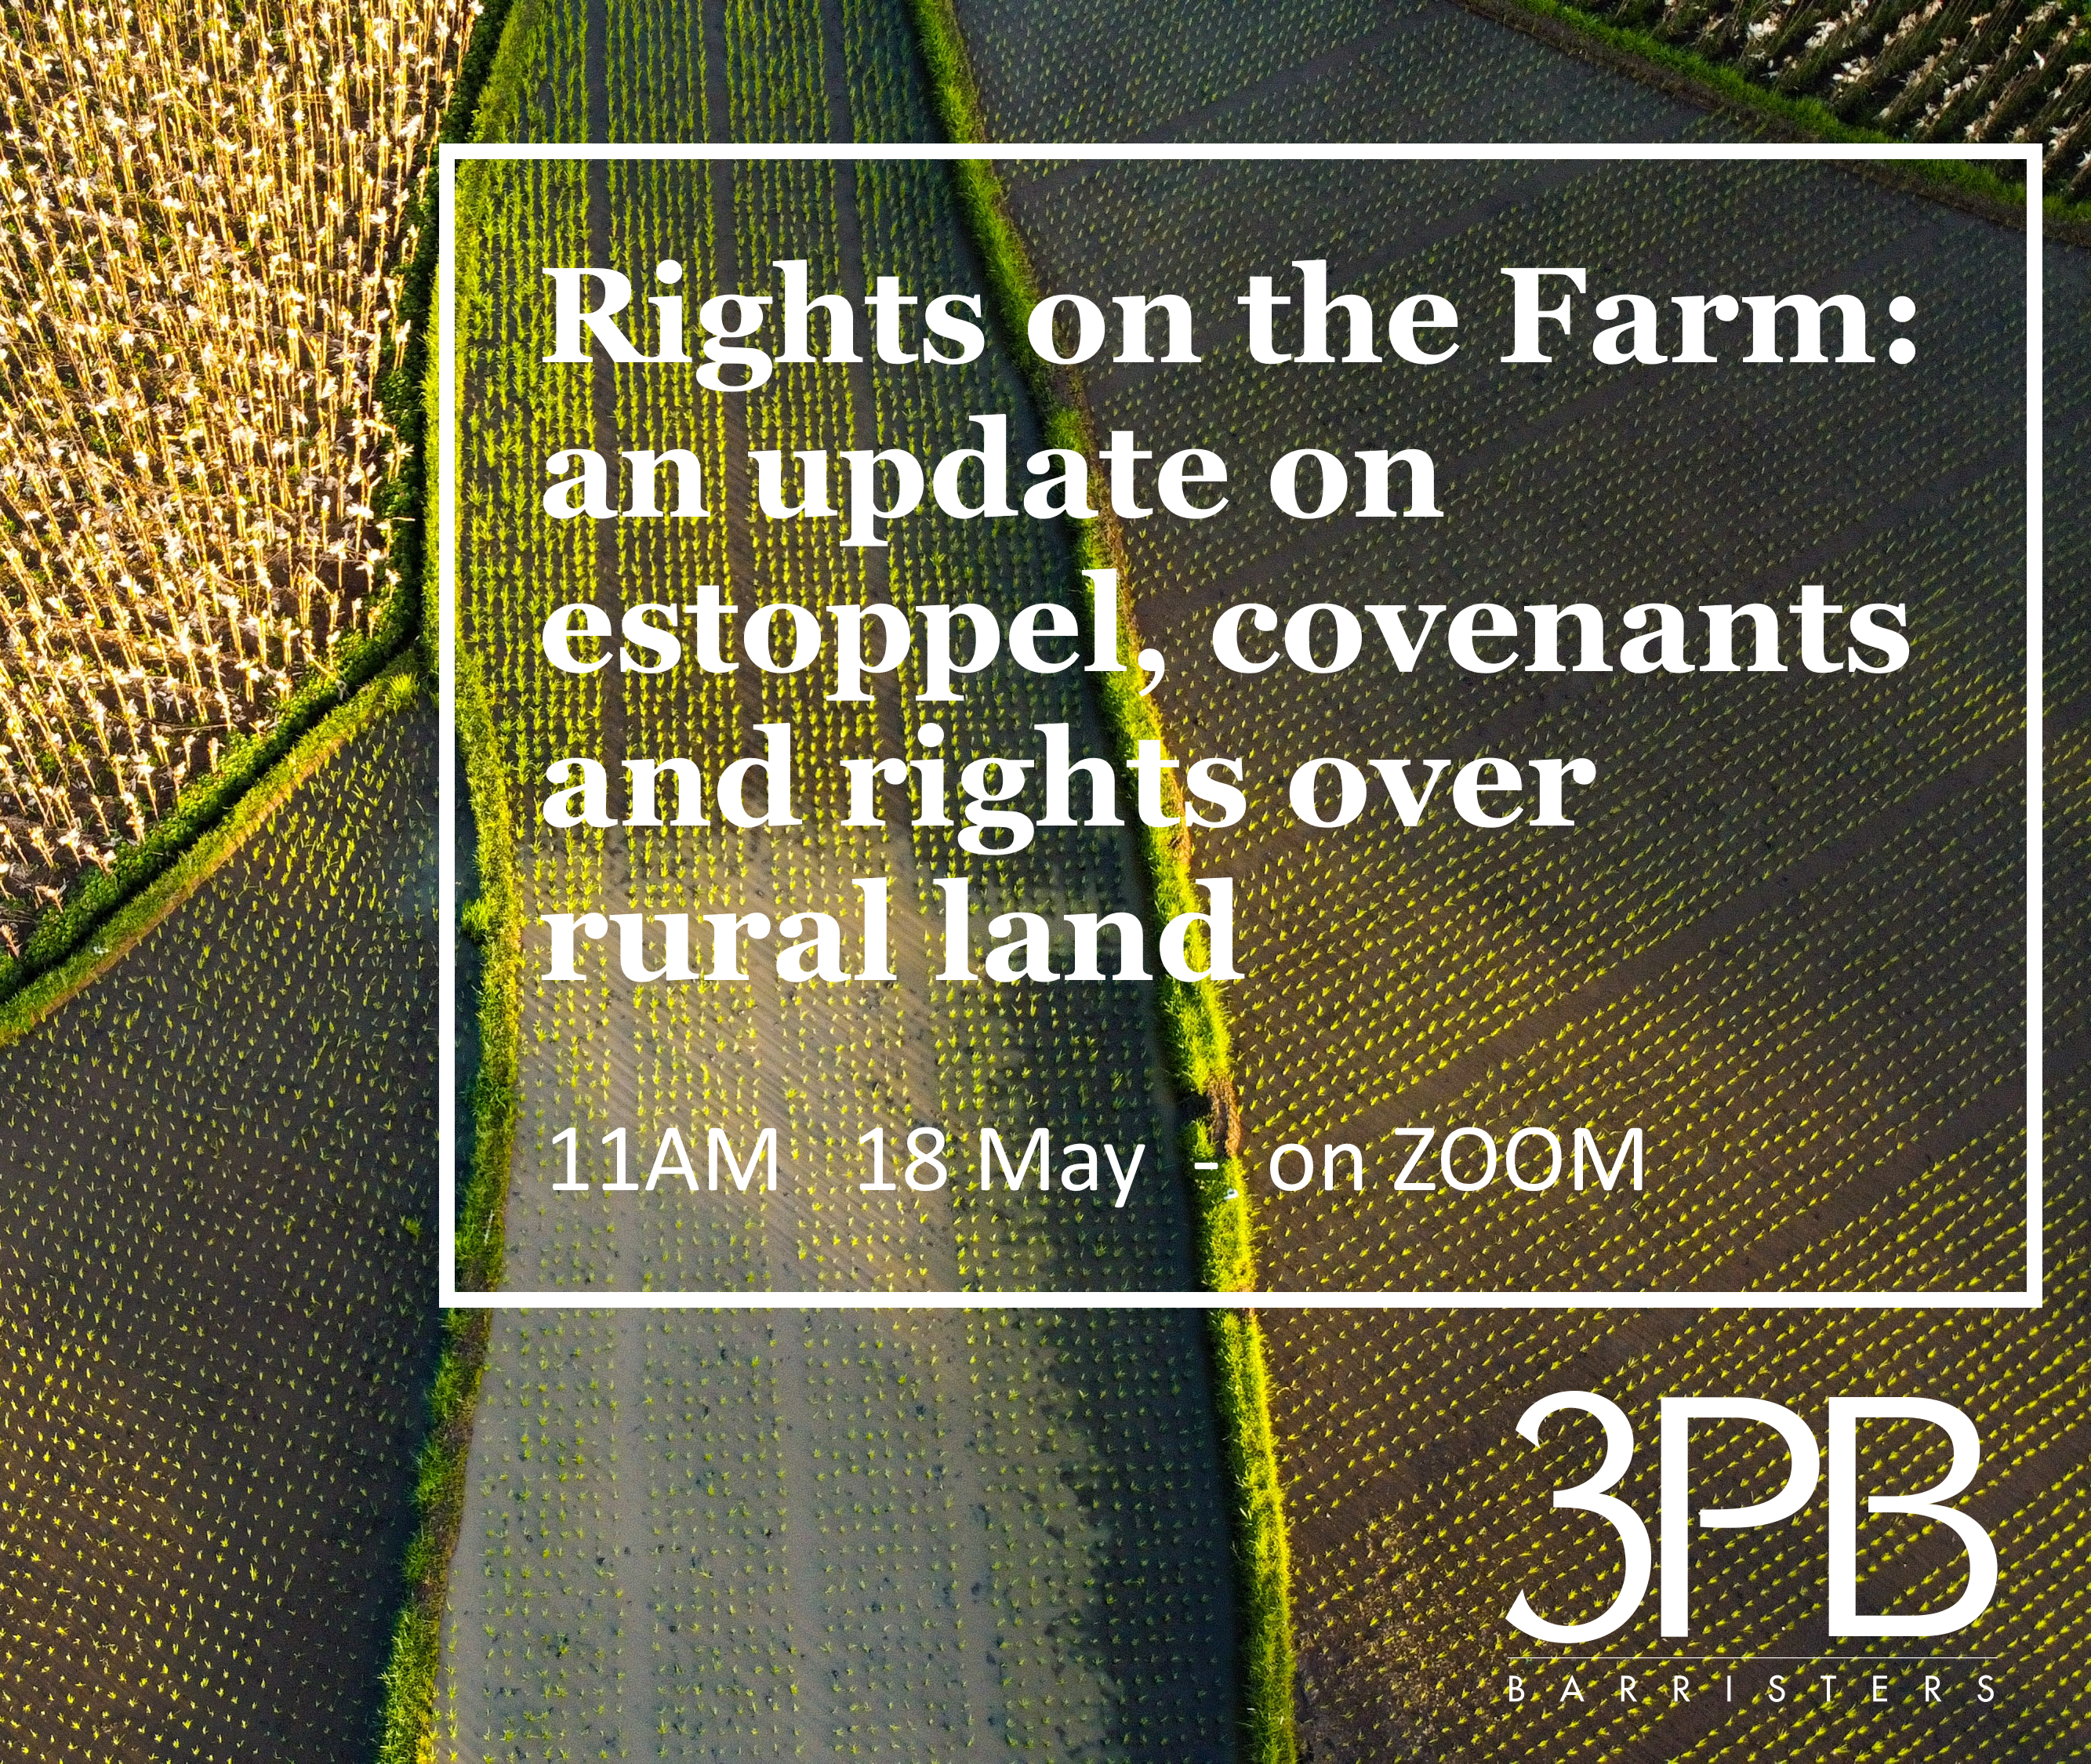 Rights on the Farm: an update on estoppel, covenants and rights over rural land